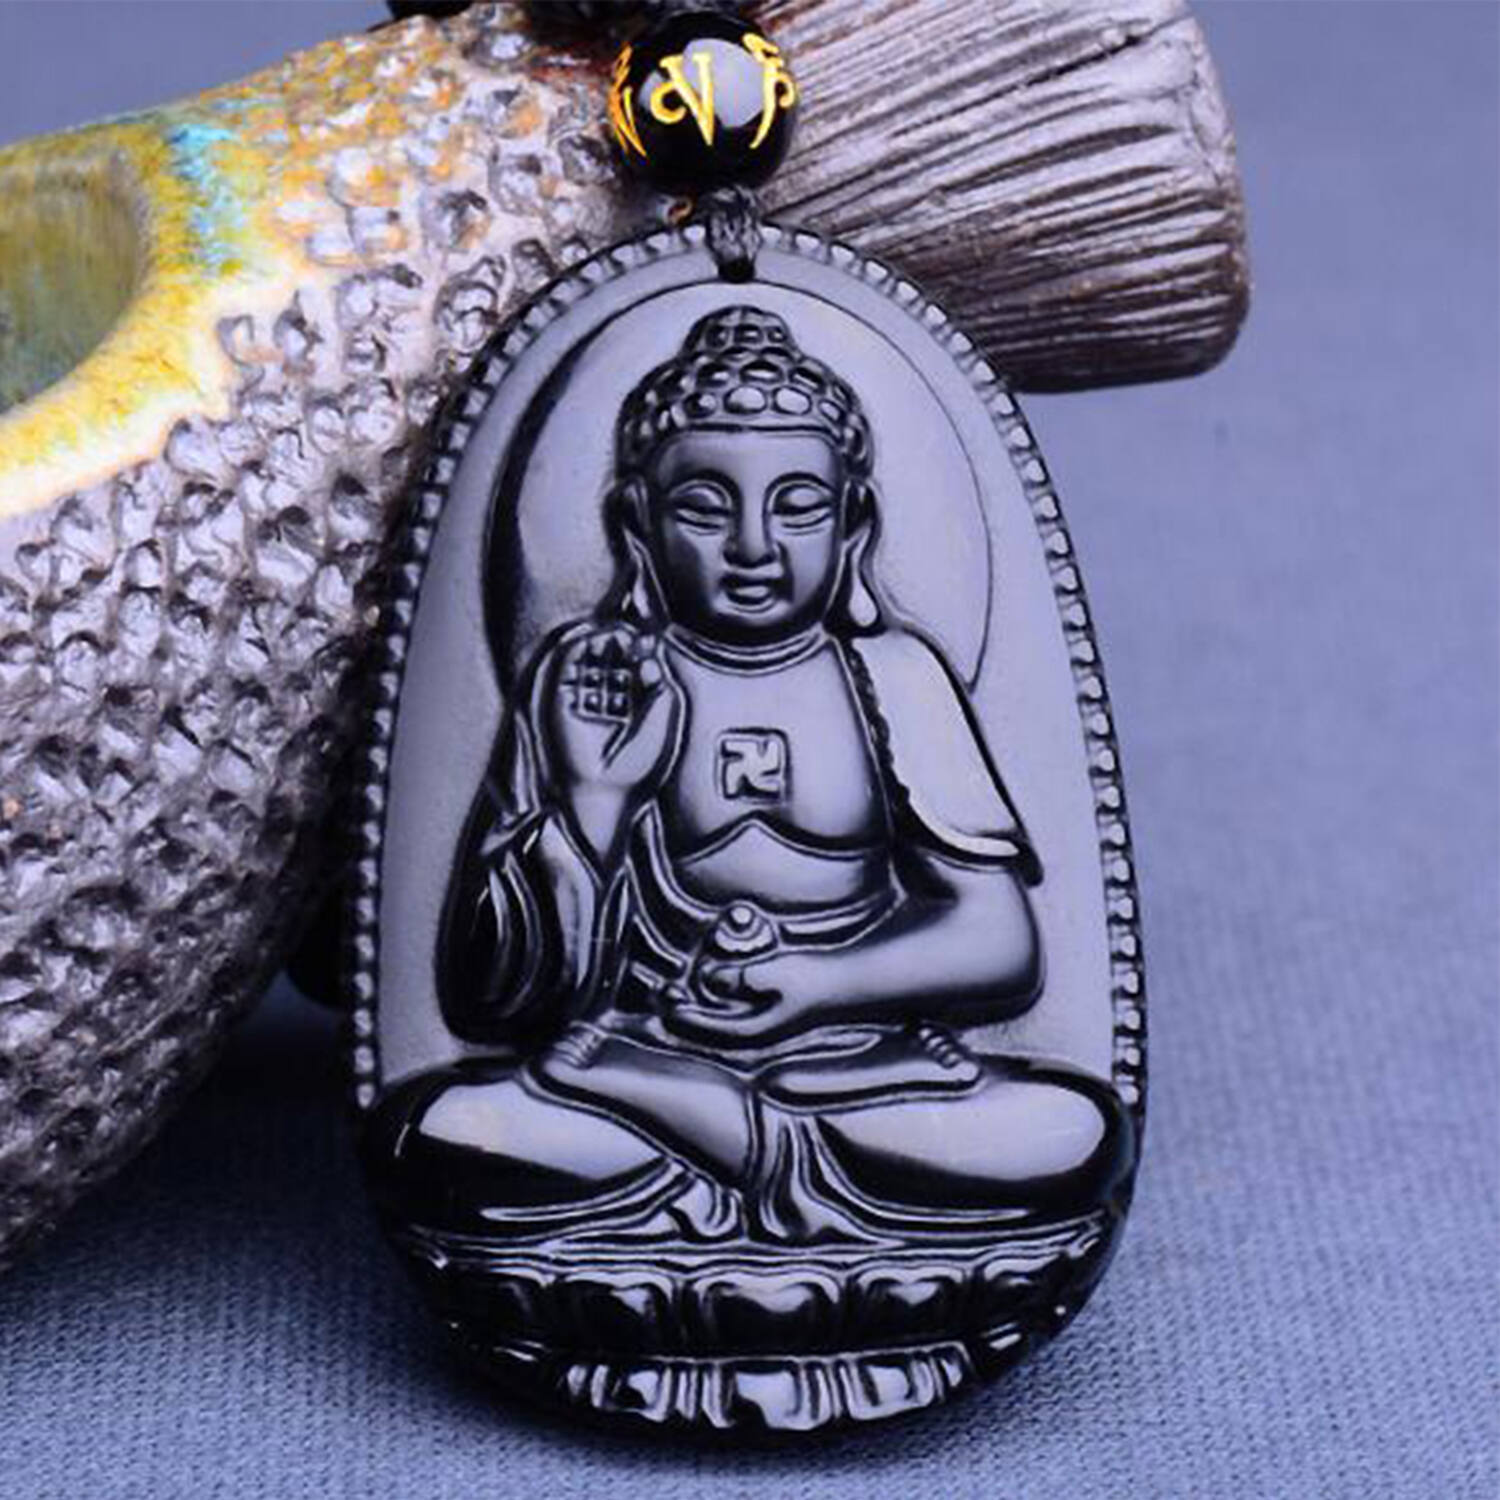 Real Black Jade Buddha Necklace, Lucky Smile Laughing Charm, Chinese  Vintage Traditional Pendent, Cute Carving Jade Jewelry, Gift Men Women -  Etsy